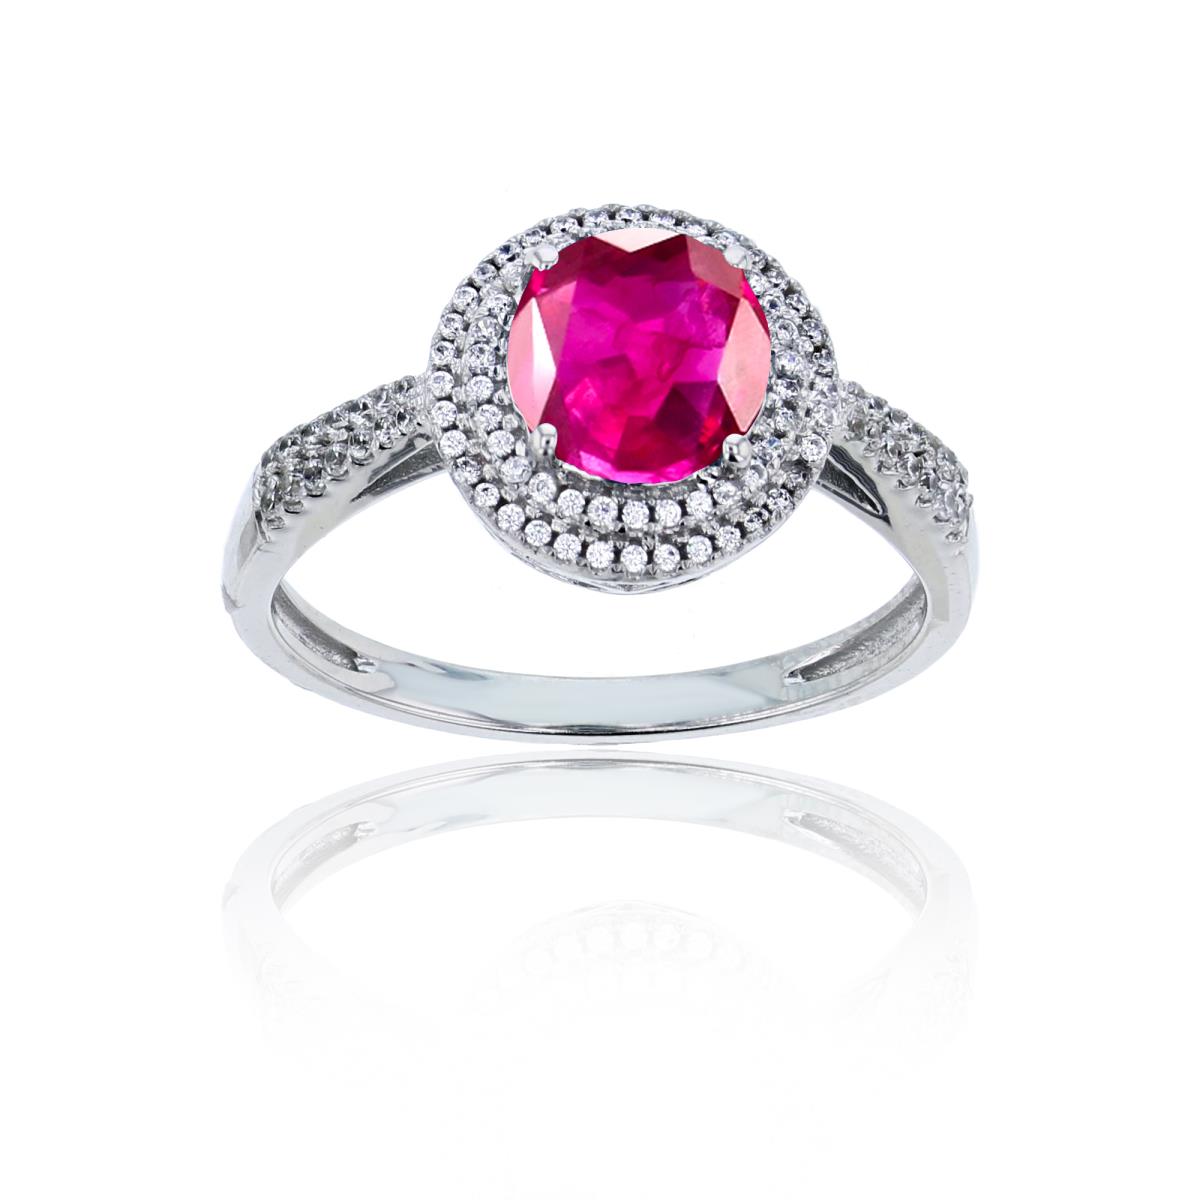 10K White Gold 0.15 CTTW Rnd Diamond & 7mm Rnd Glass Filled Ruby Double Halo Ring